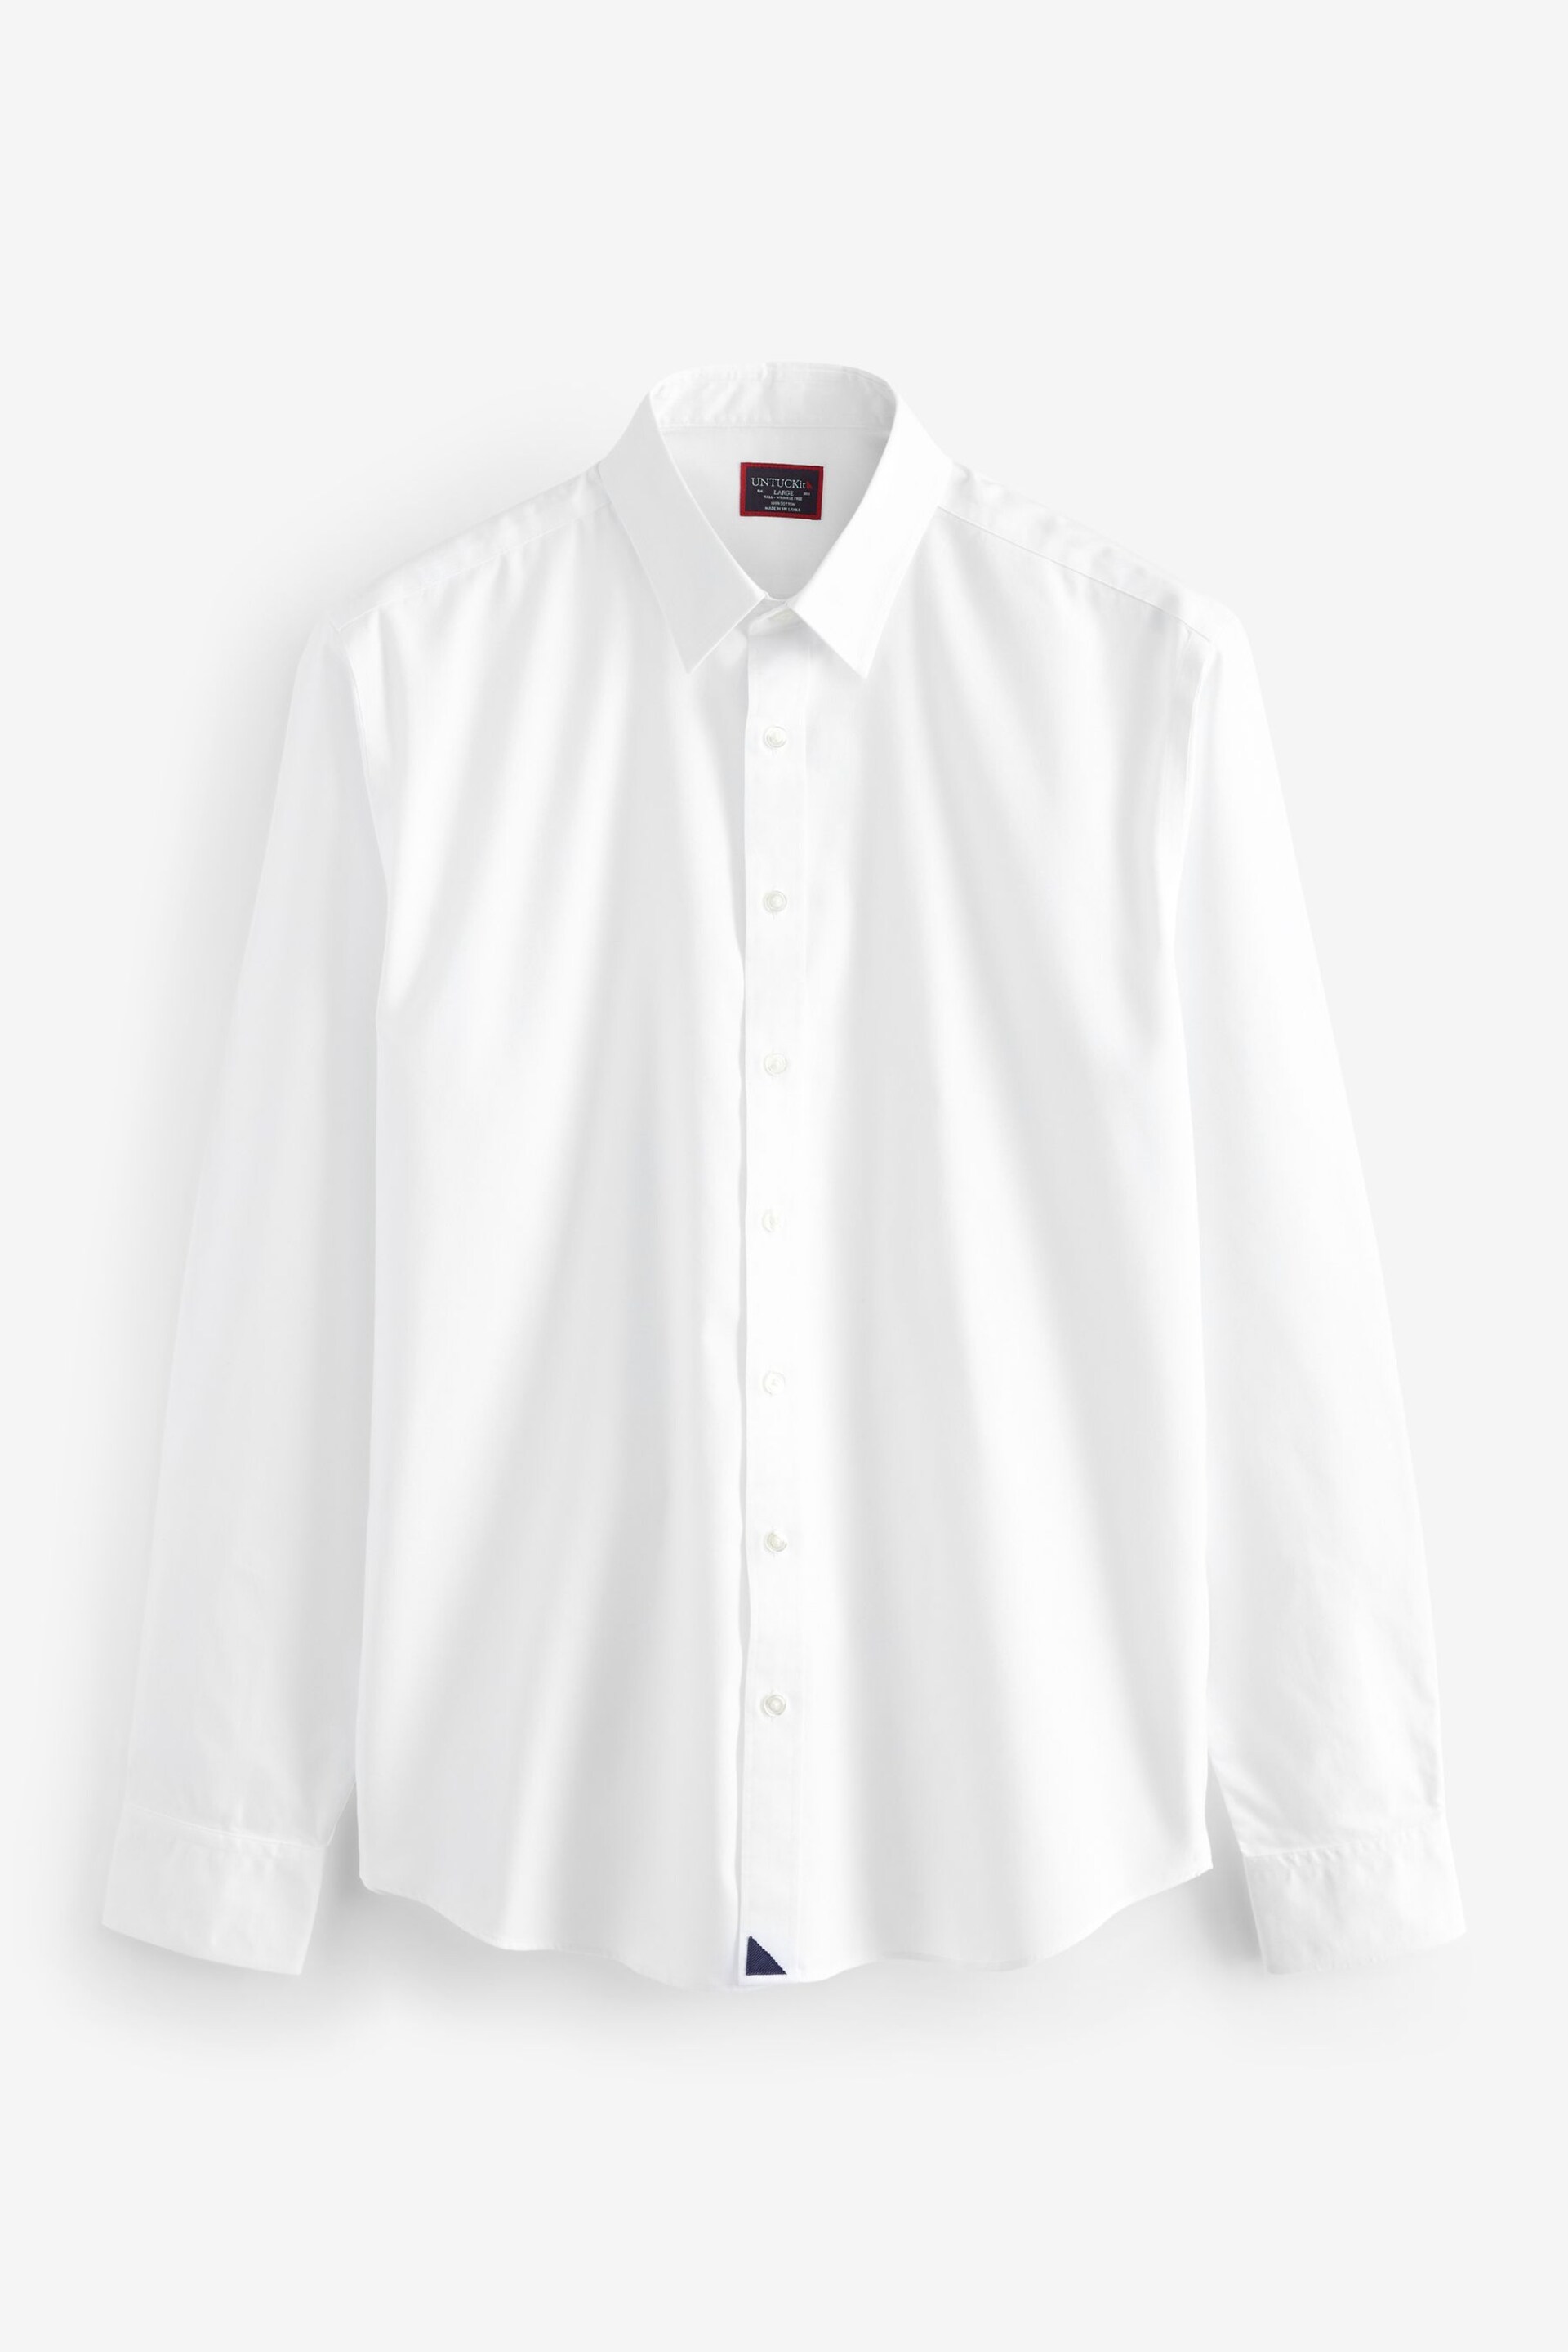 UNTUCKit White Lilly Wrinkle-Free Relaxed Fit Las Cases Shirt - Image 4 of 4